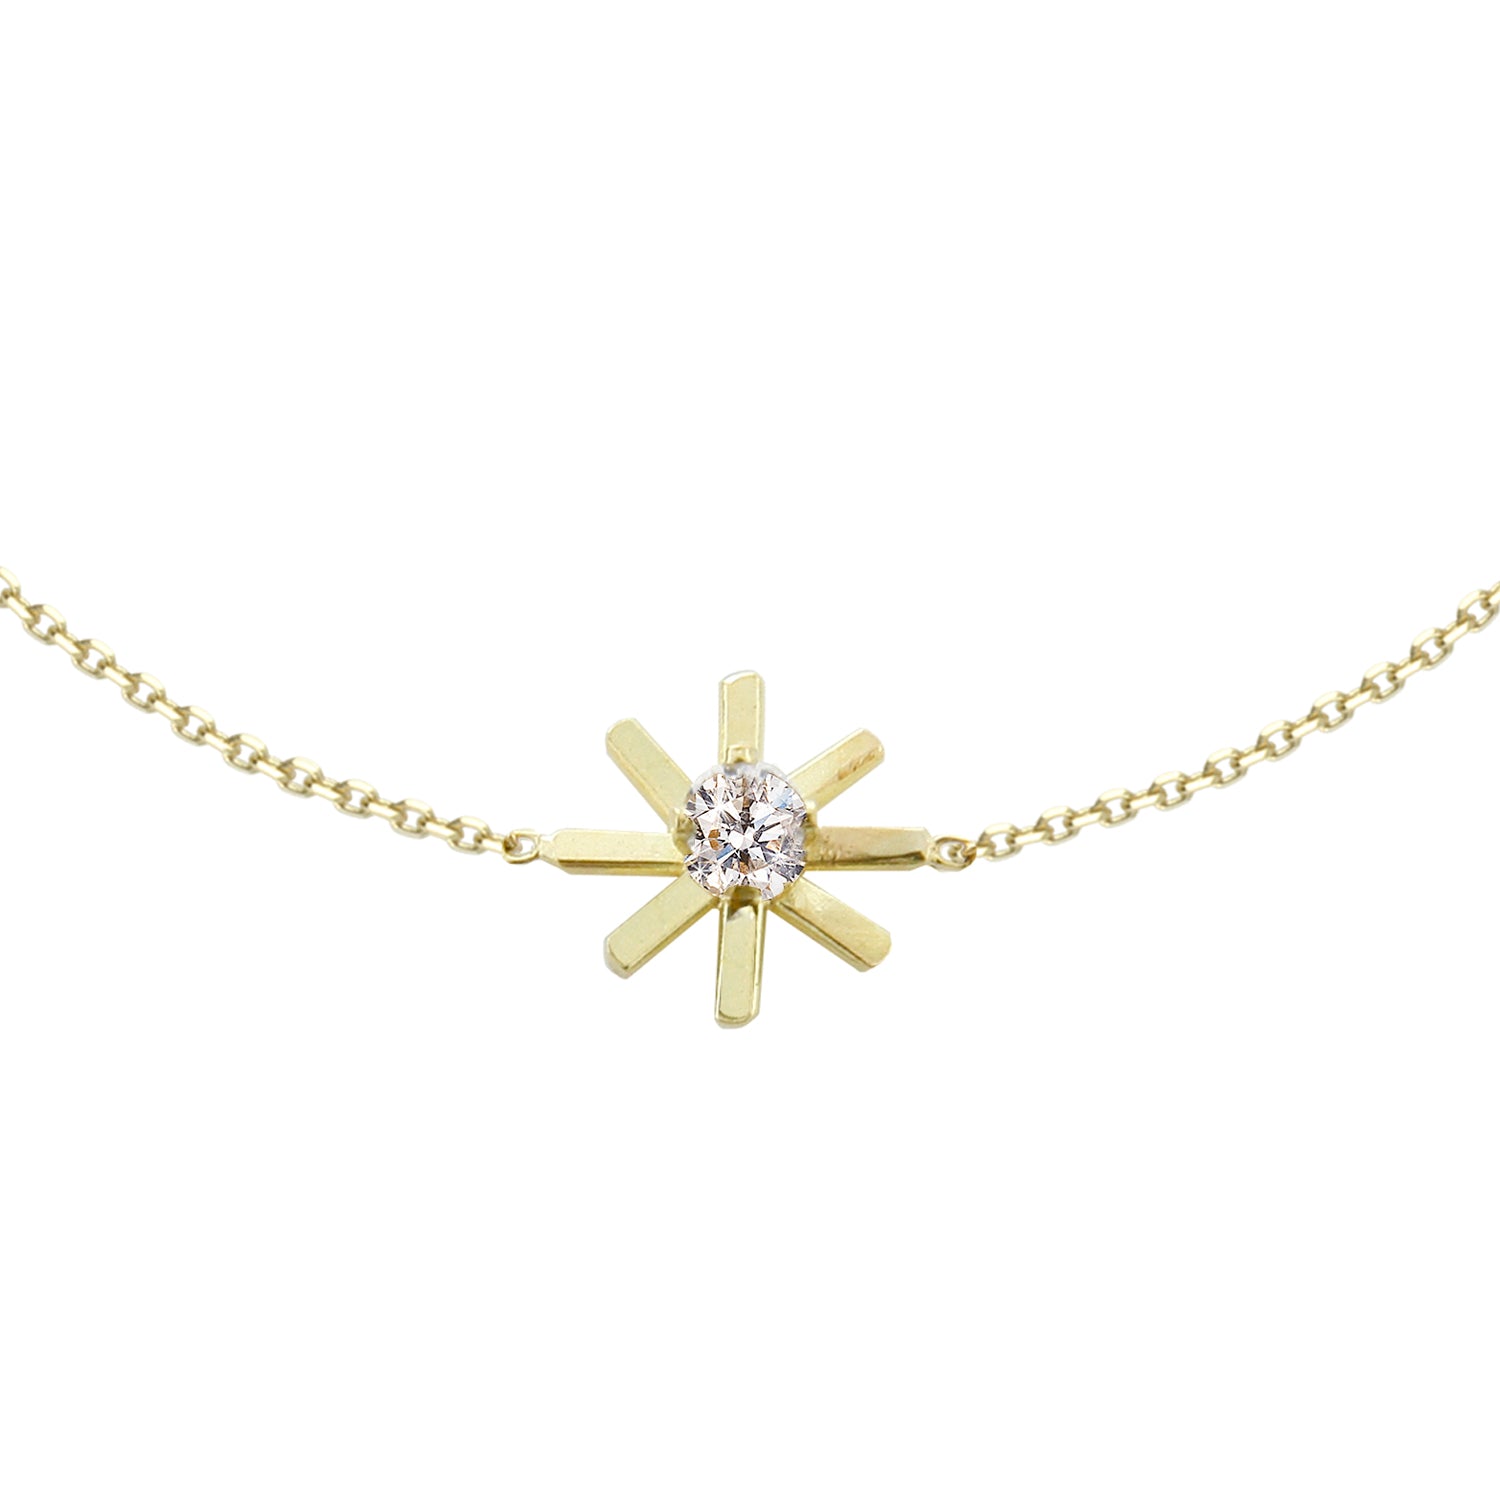 This 18ct yellow gold fine chain bracelet is from our Pop Up Daisy Collection. The Flower motif is made up from fine gold petals and features a central Diamond set collet